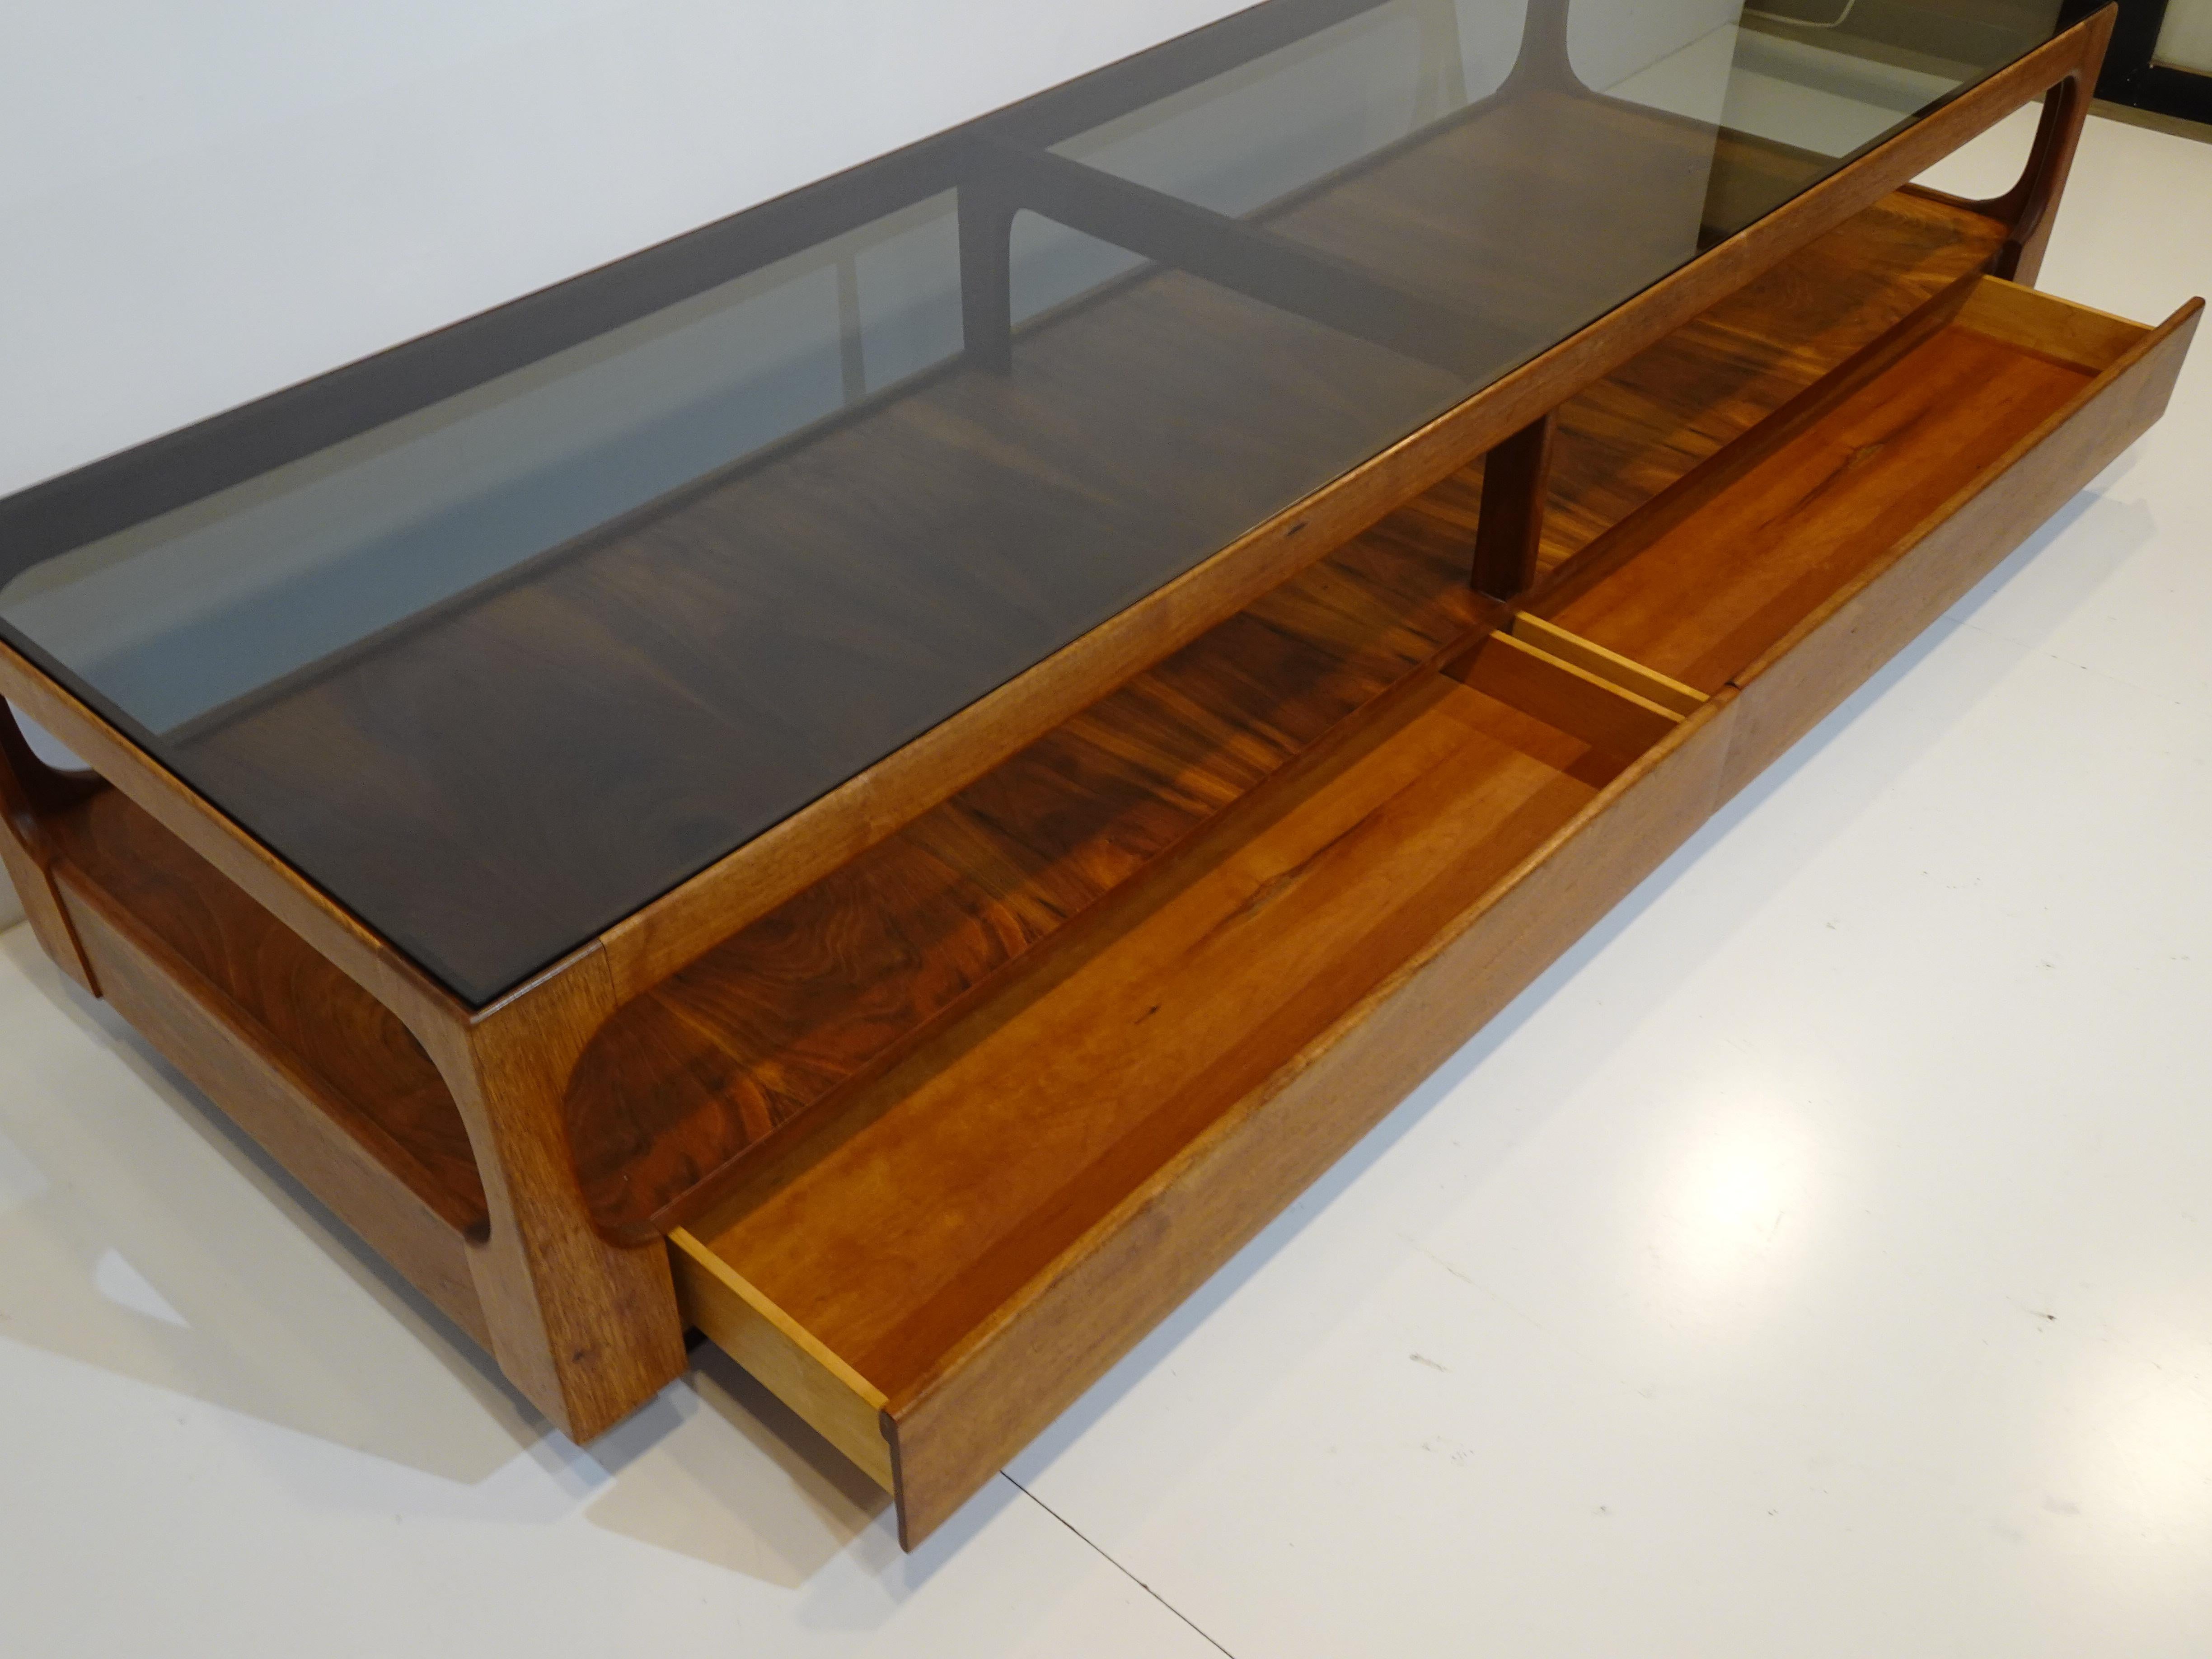 A well crafted walnut coffee table in a long cube style having well grained dark walnut to the lower shelve area . Topped with smoked glass, curved walnut edges the piece has a floating feel on it's satin black kick base and to the front are two